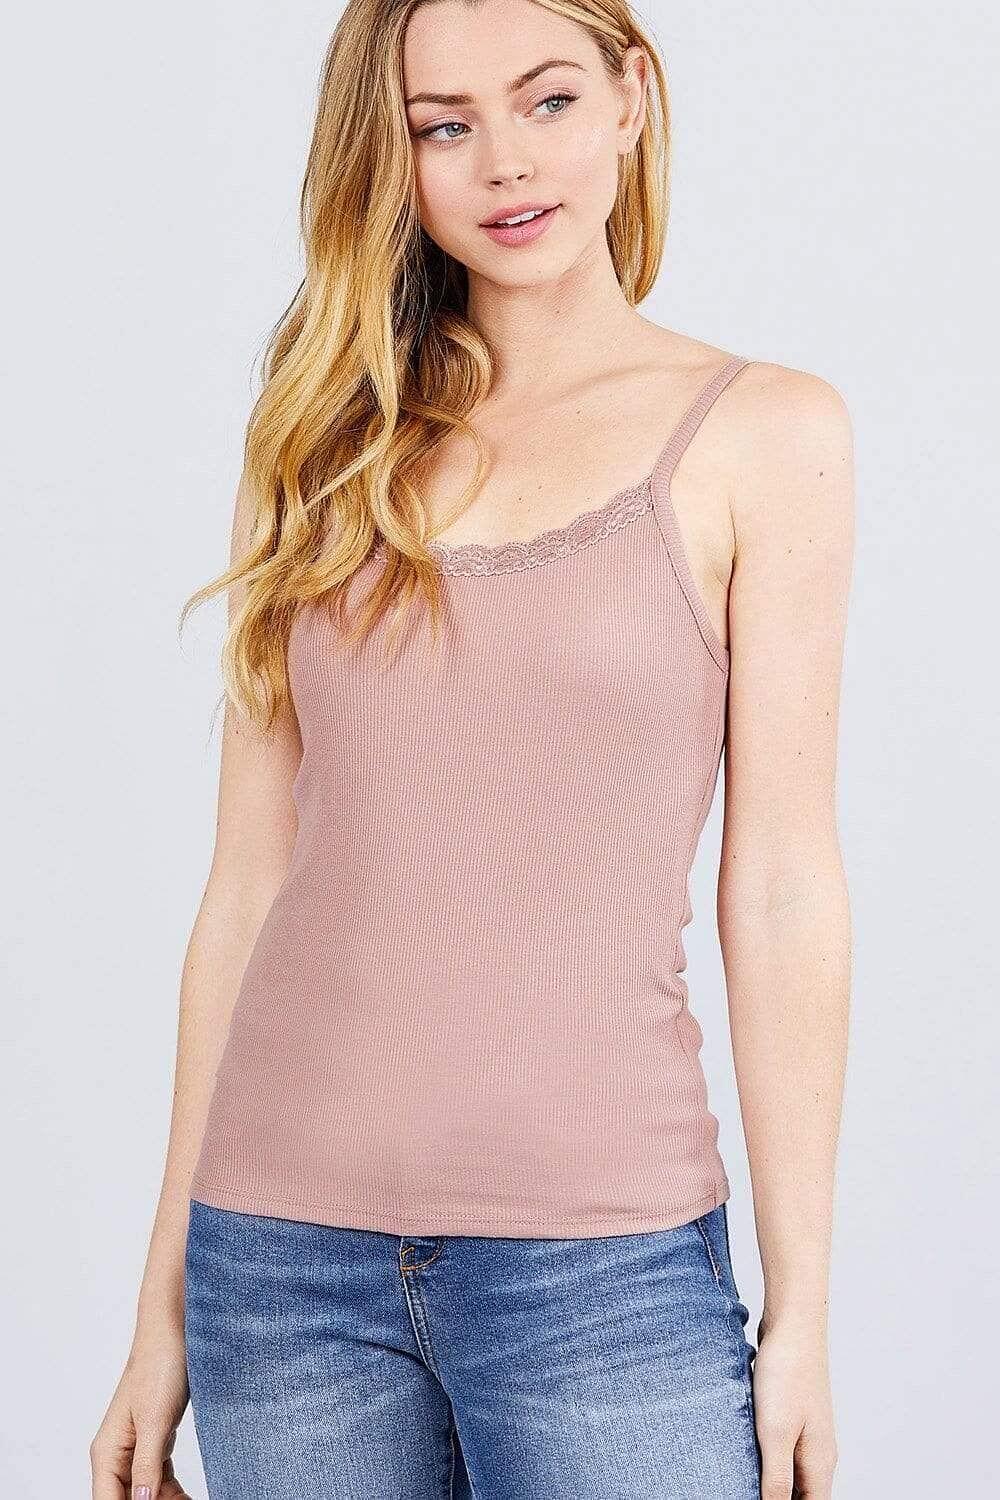 Beige Spaghetti Strap Cami Top - Shopping Therapy S Tank Tops & Camis